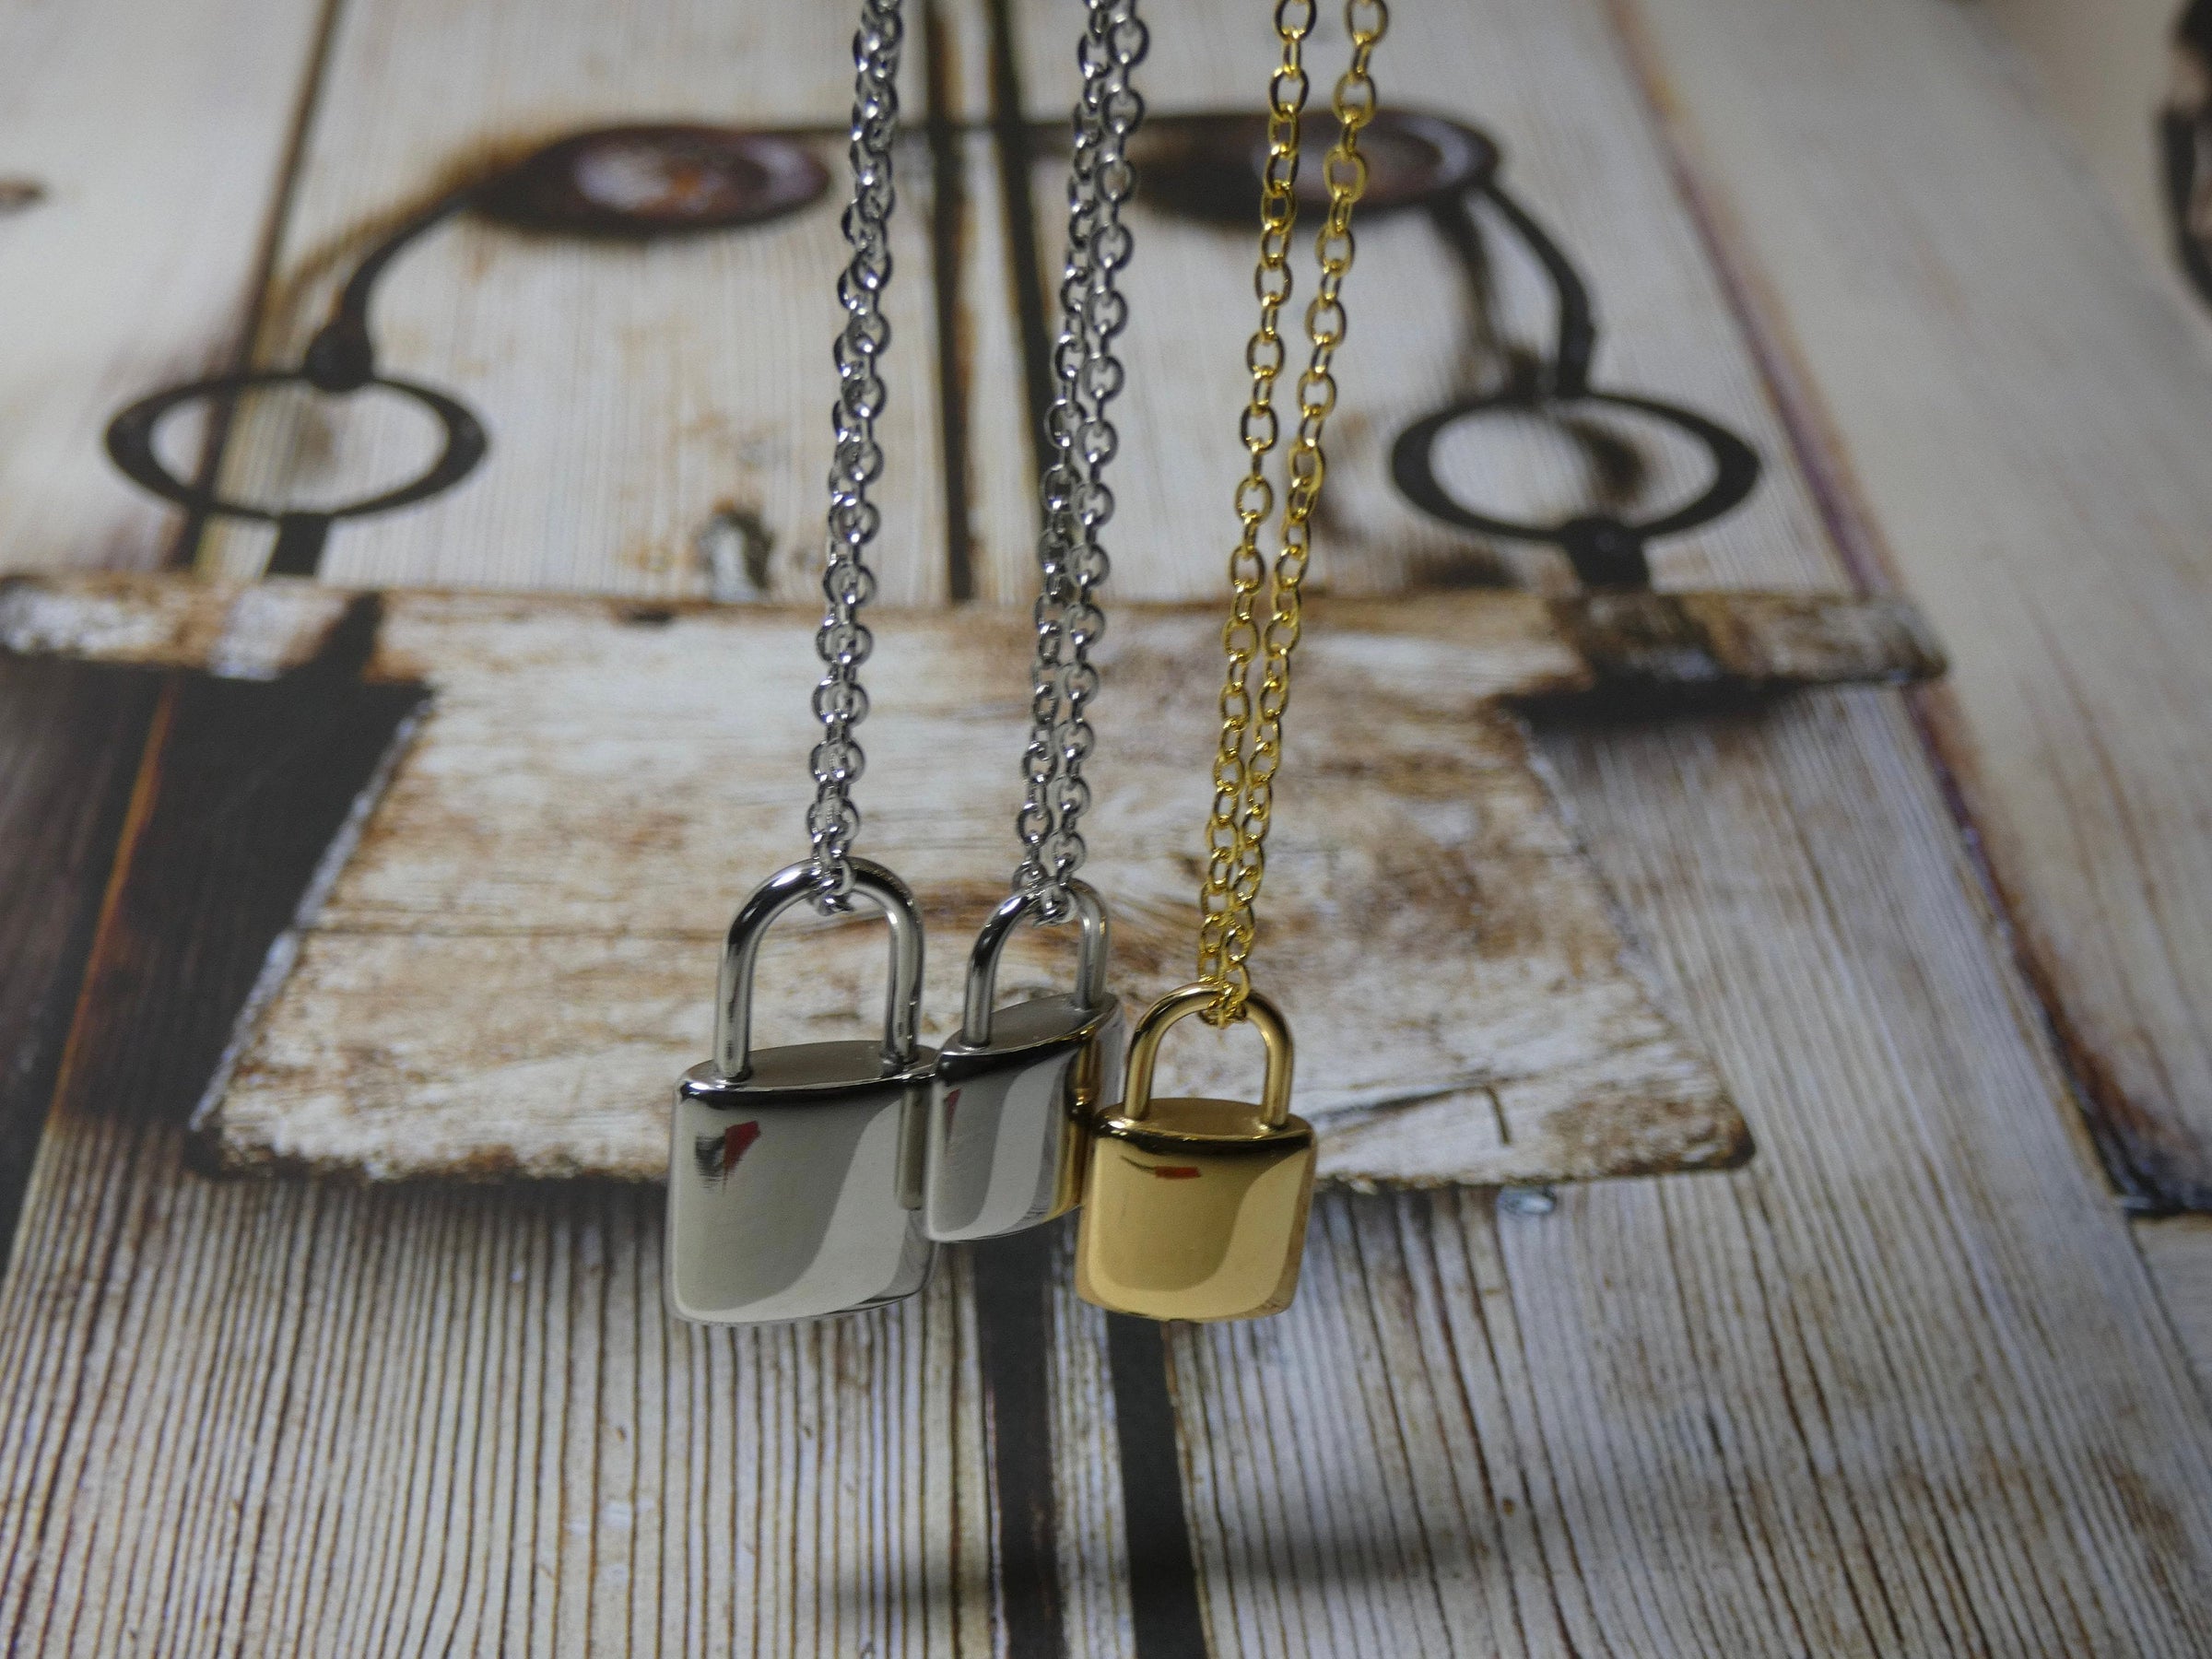 Lock Cremation Necklace in Sterling Silver